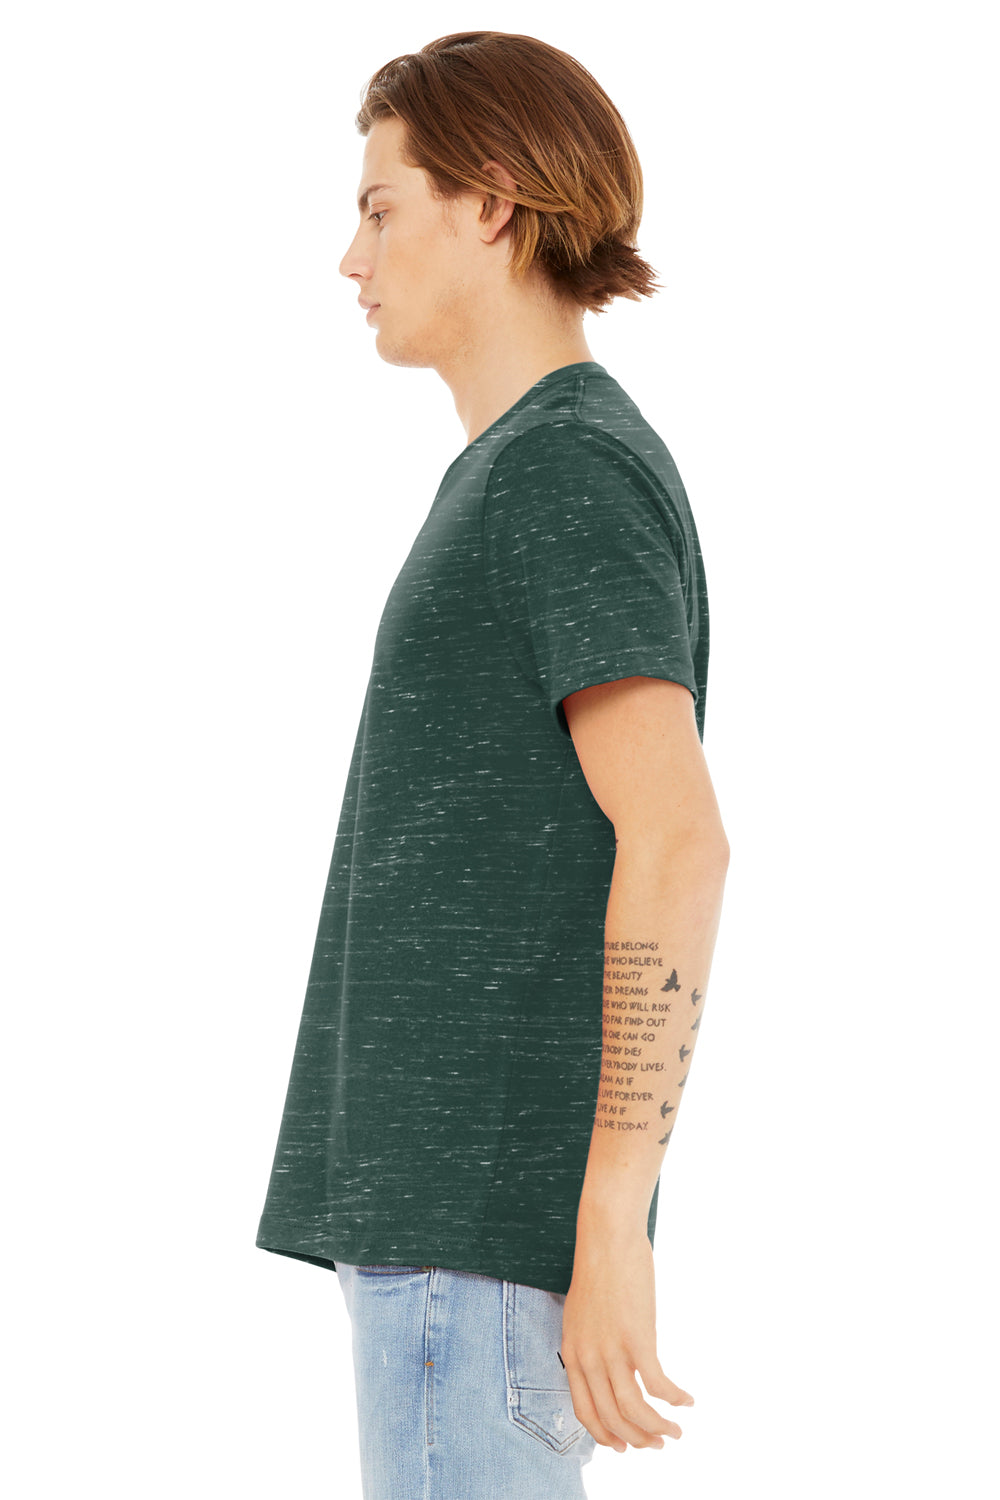 Bella + Canvas BC3655/3655C Mens Textured Jersey Short Sleeve V-Neck T-Shirt Forest Green Marble Model Side